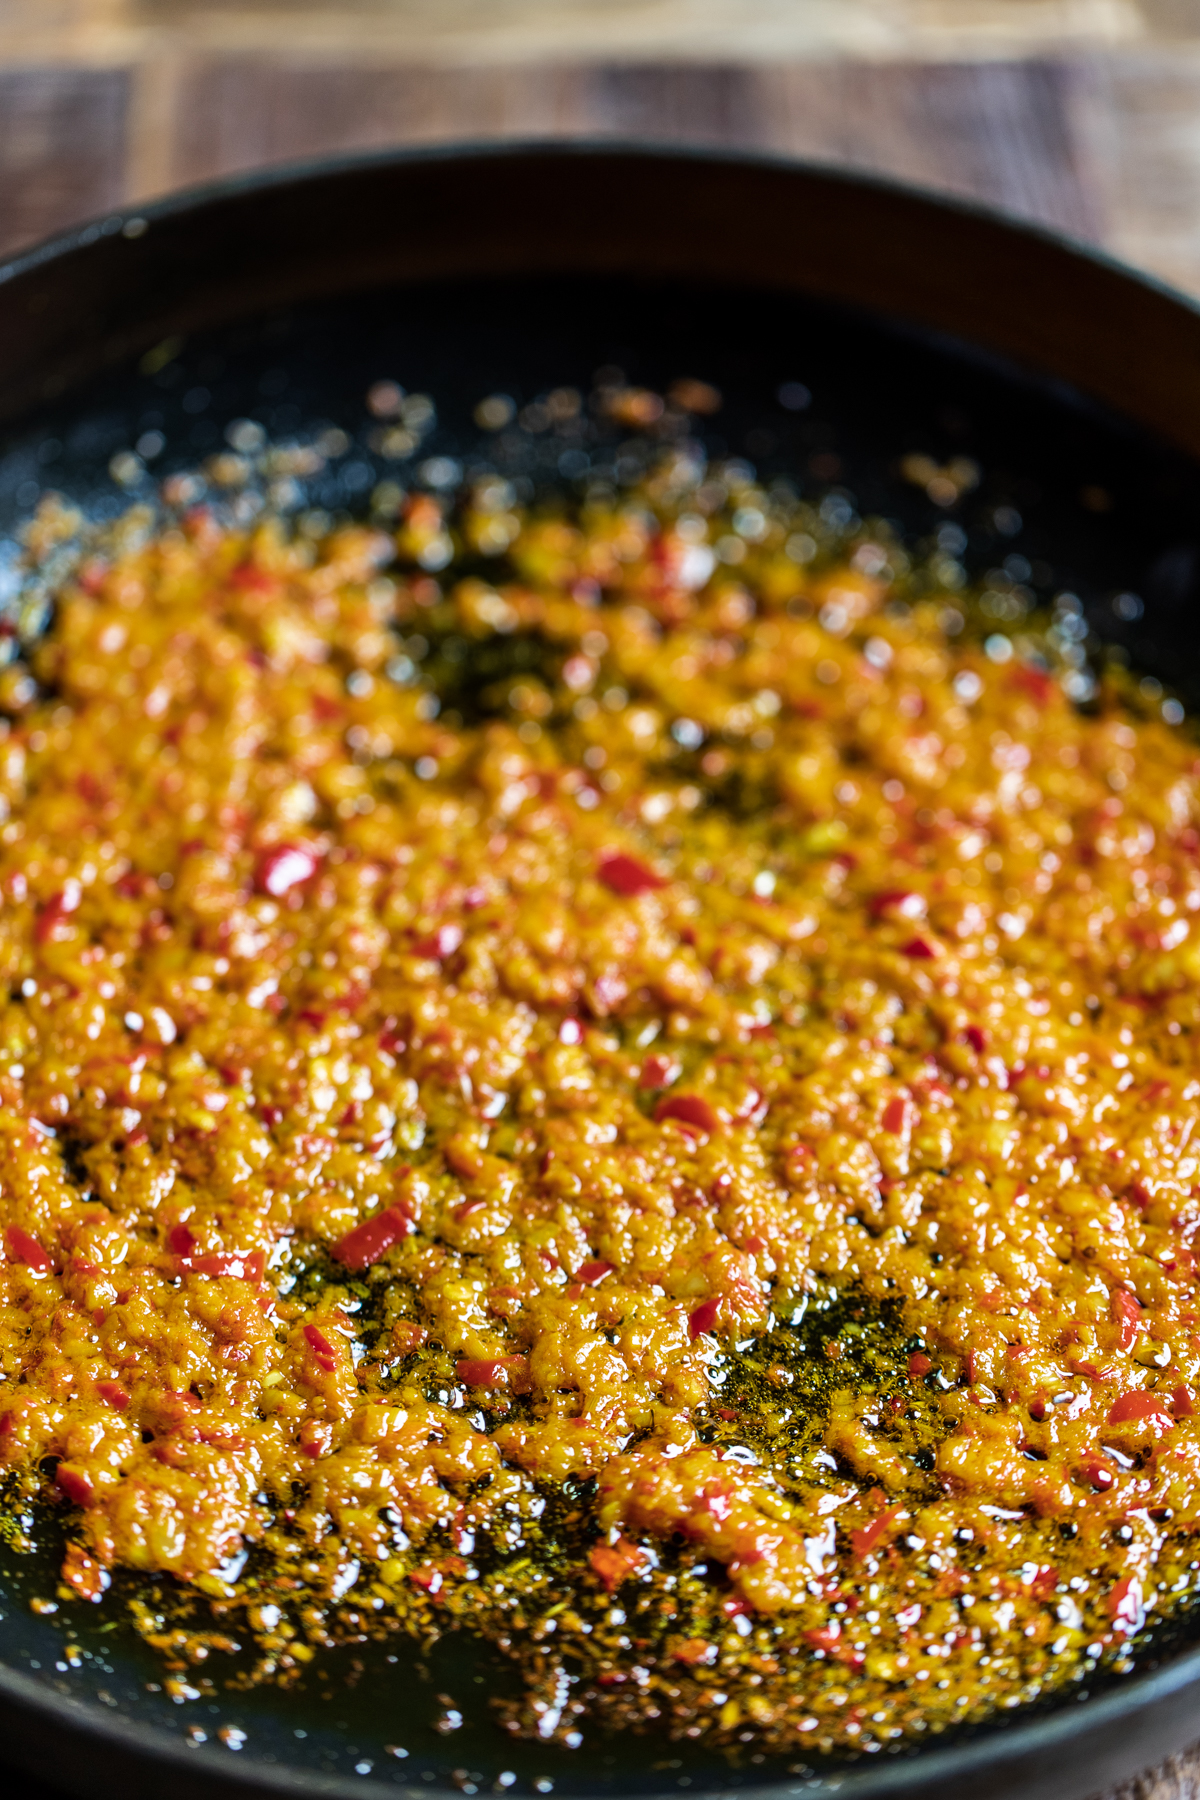 Malaysian curry paste cooking in a black cast iron pan.